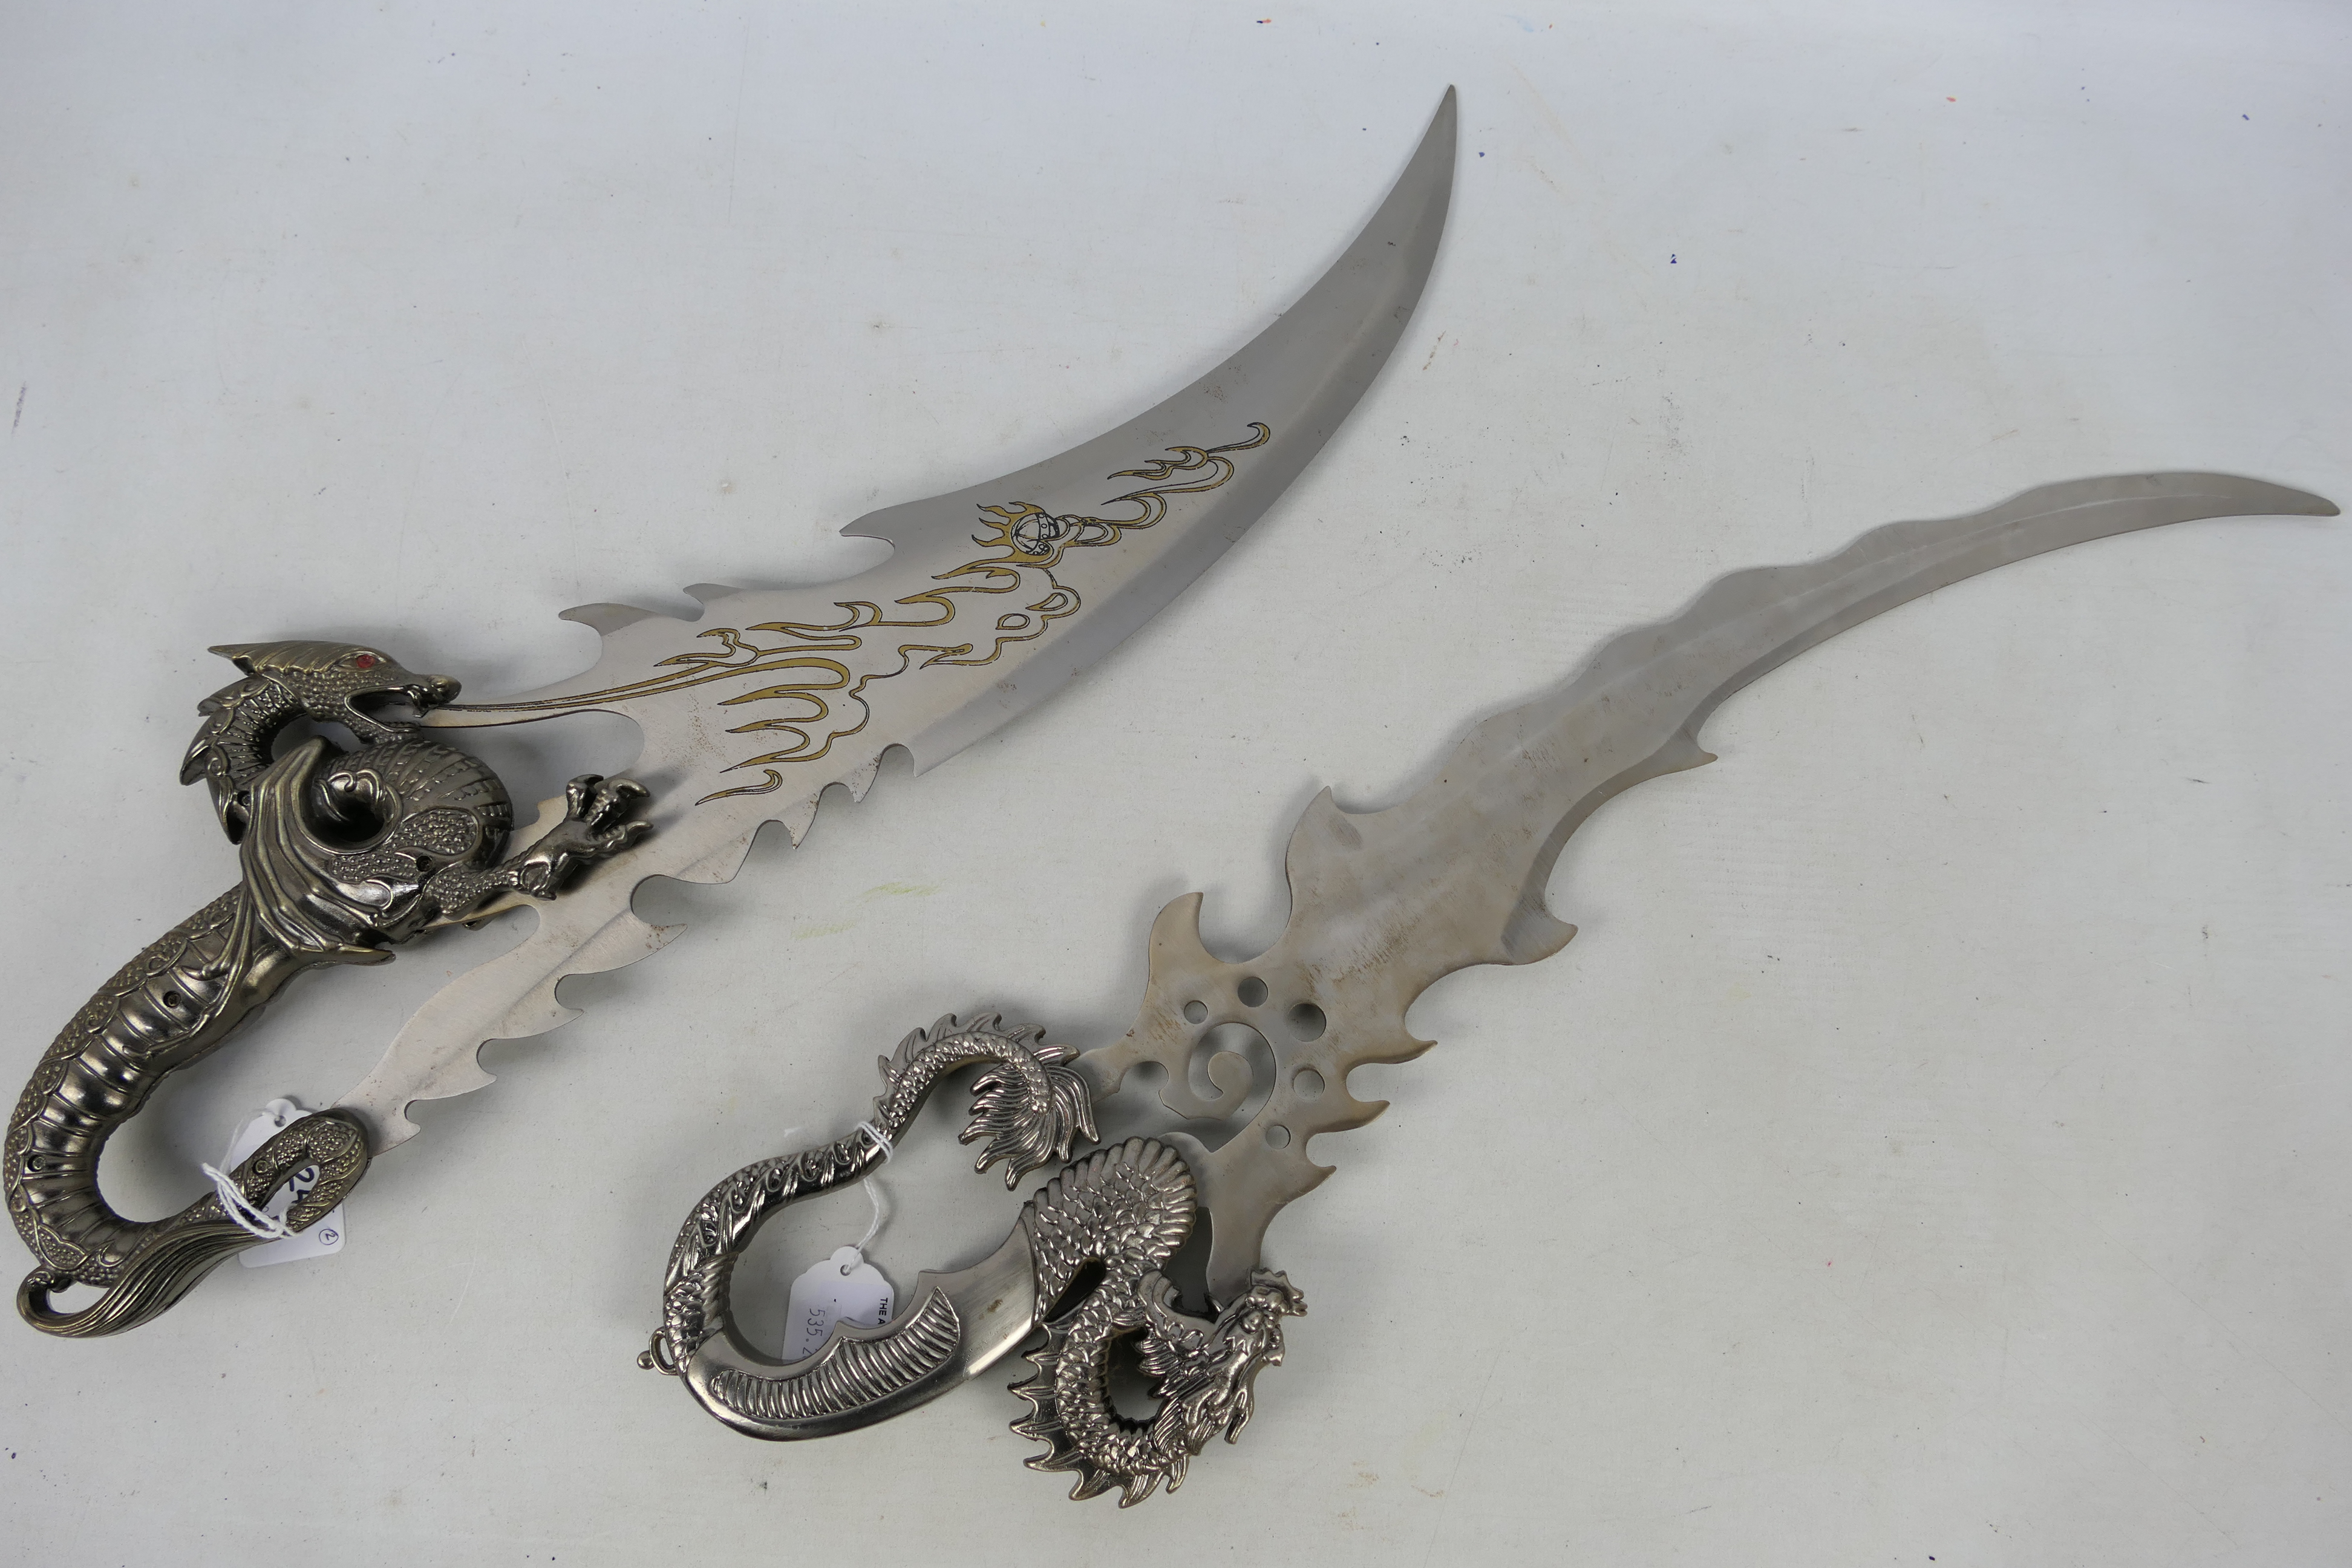 Two decorative Fantasy blades with dragon form hilts, approximately 55 cm (l).